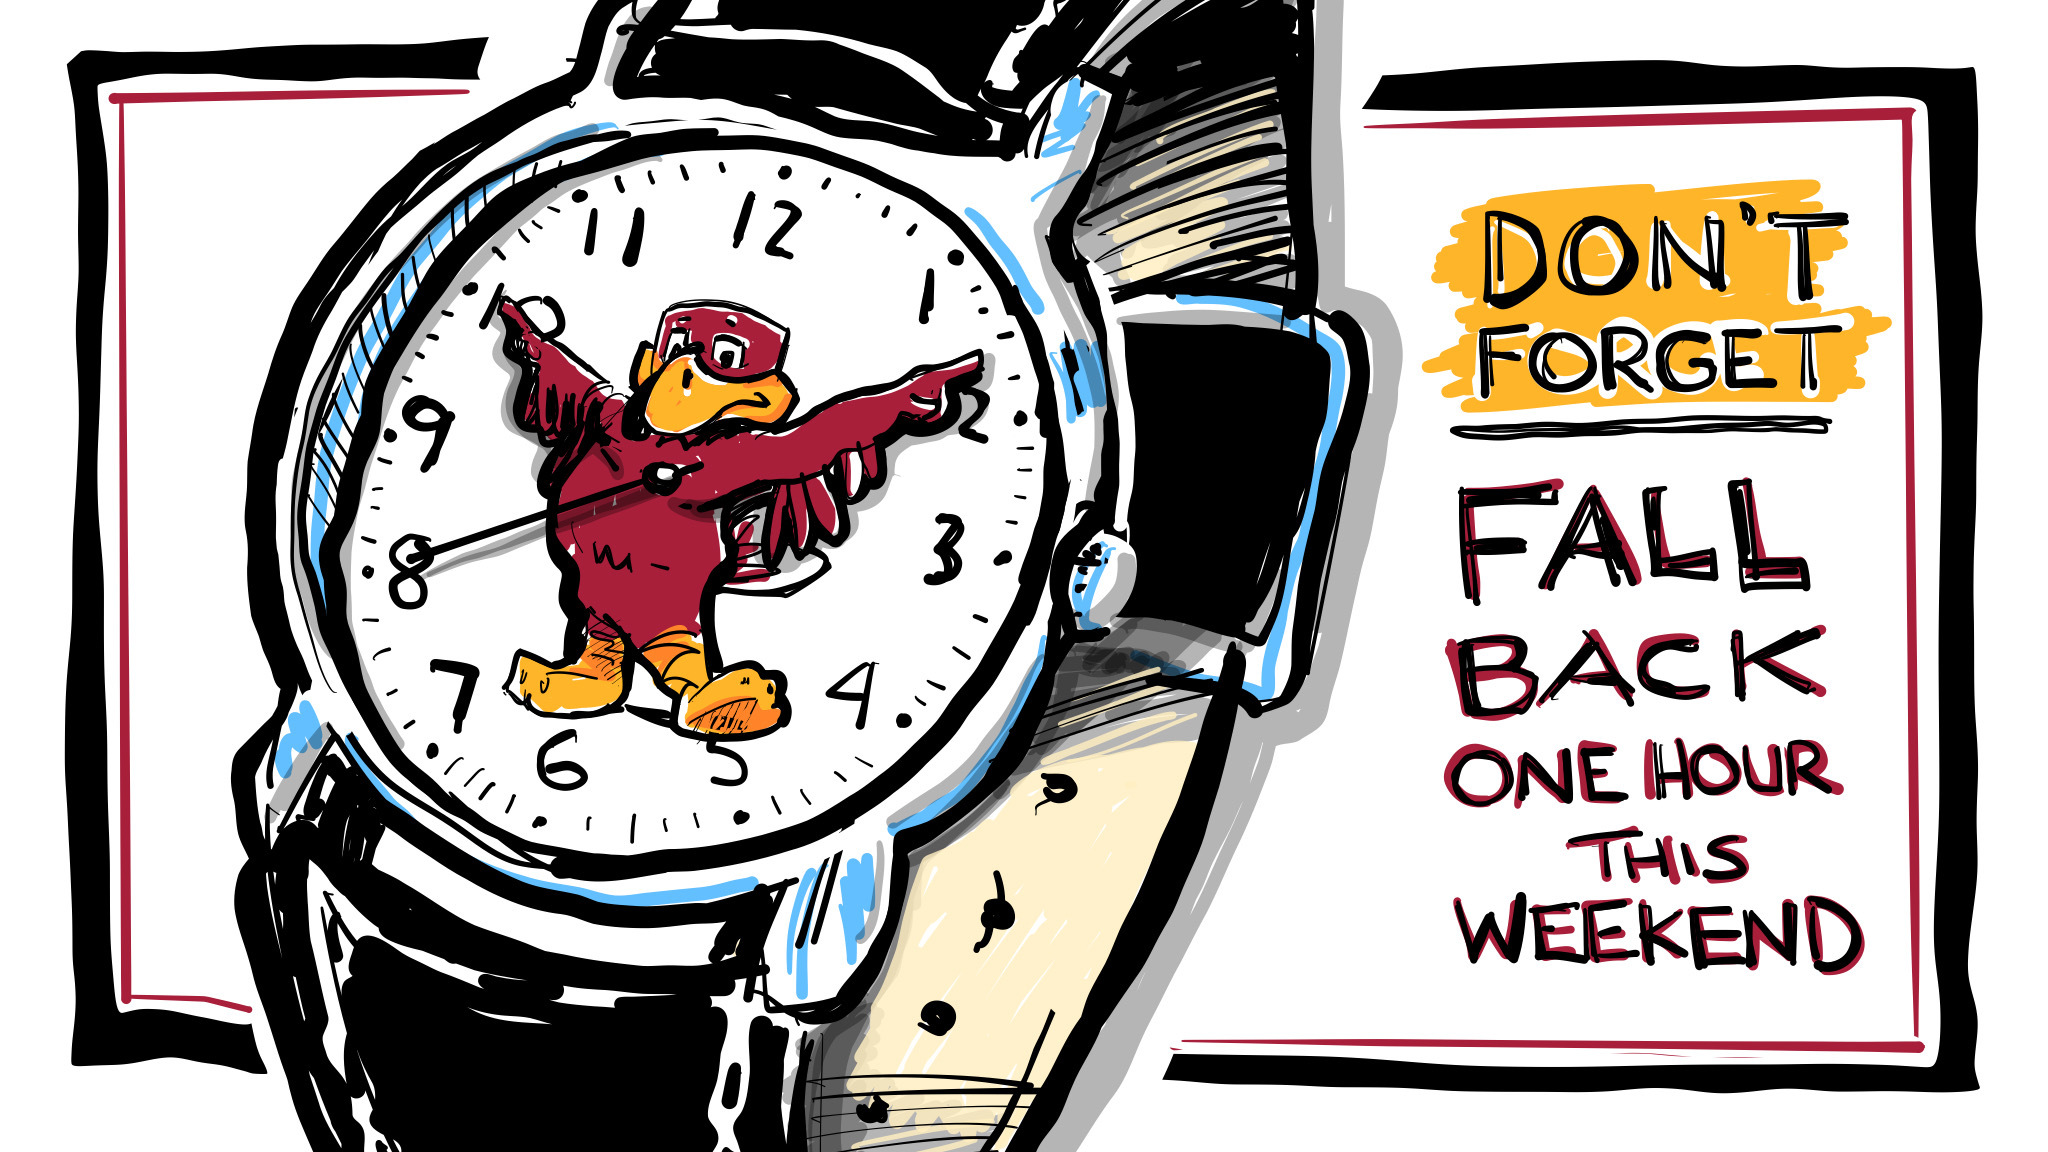 Digital sketch of a HokieBird watch reminding folks to fall back one hour this weekend